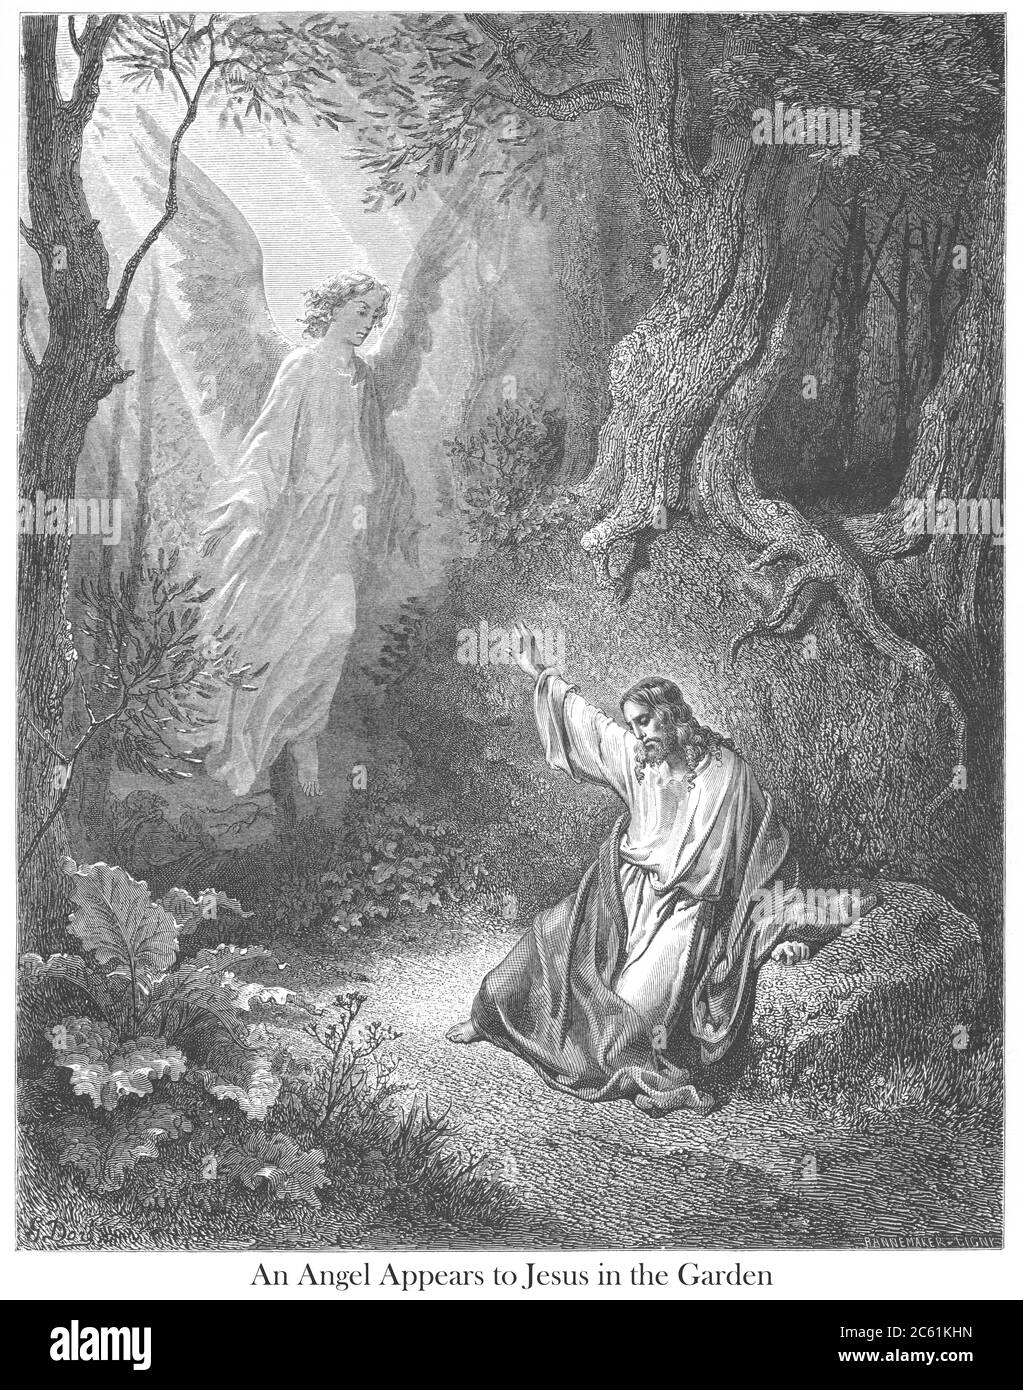 An Angel Appears to Jesus in the garden (or The Agony in the Garden) [Luke 22:43-44] From the book 'Bible Gallery' Illustrated by Gustave Dore with Memoir of Dore and Descriptive Letter-press by Talbot W. Chambers D.D. Published by Cassell & Company Limited in London and simultaneously by Mame in Tours, France in 1866 Stock Photo